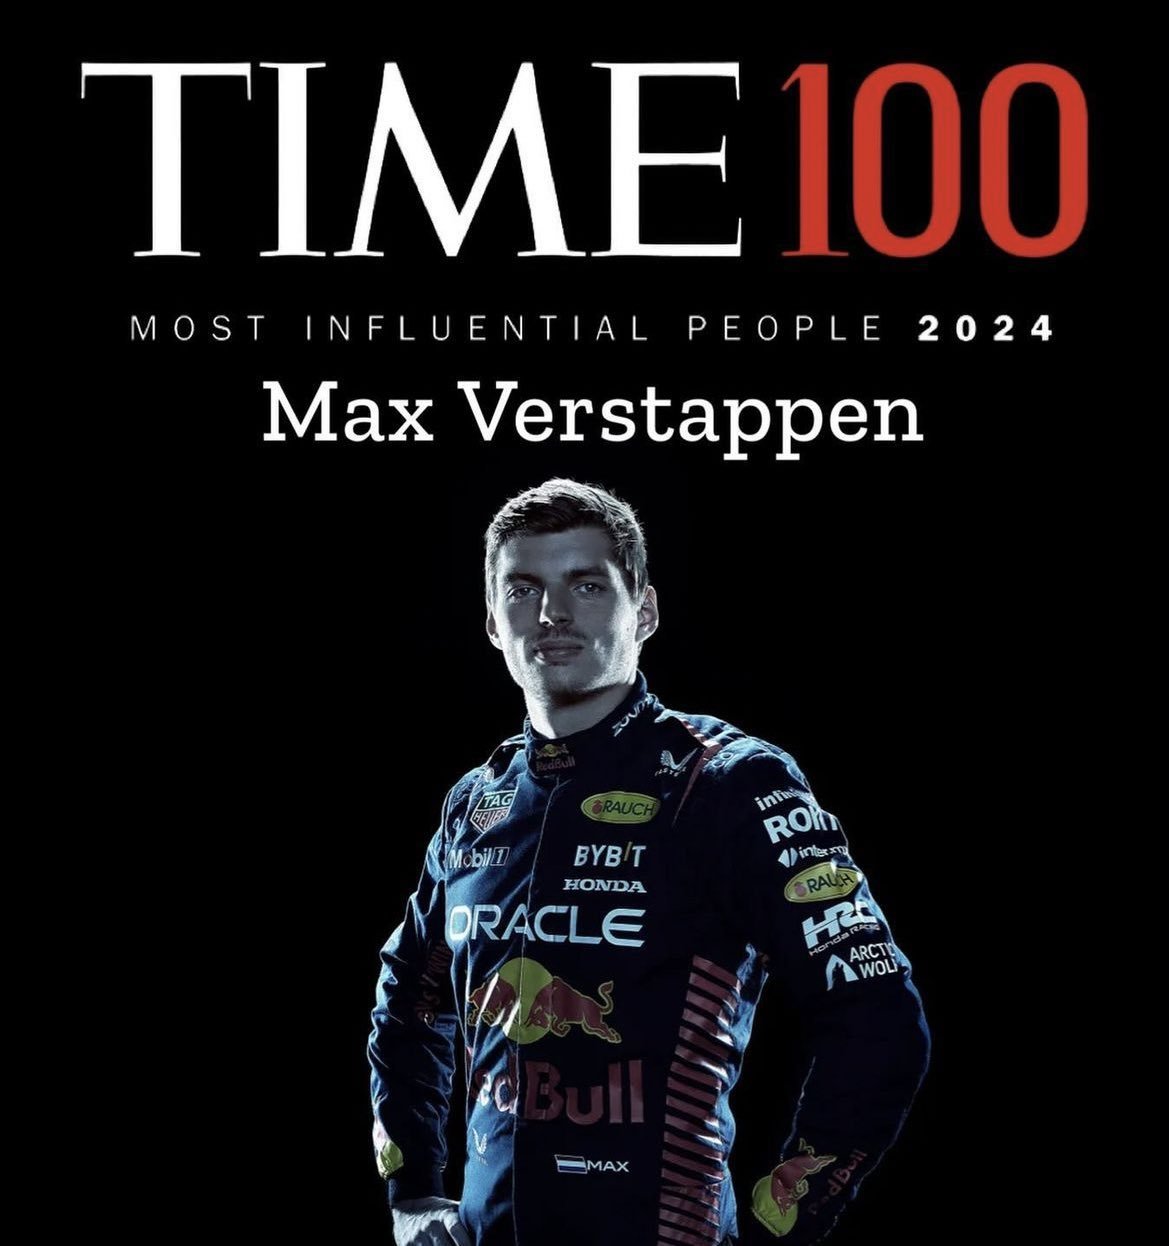 Formula 1 News: Verstappen named to Time 100 most influential